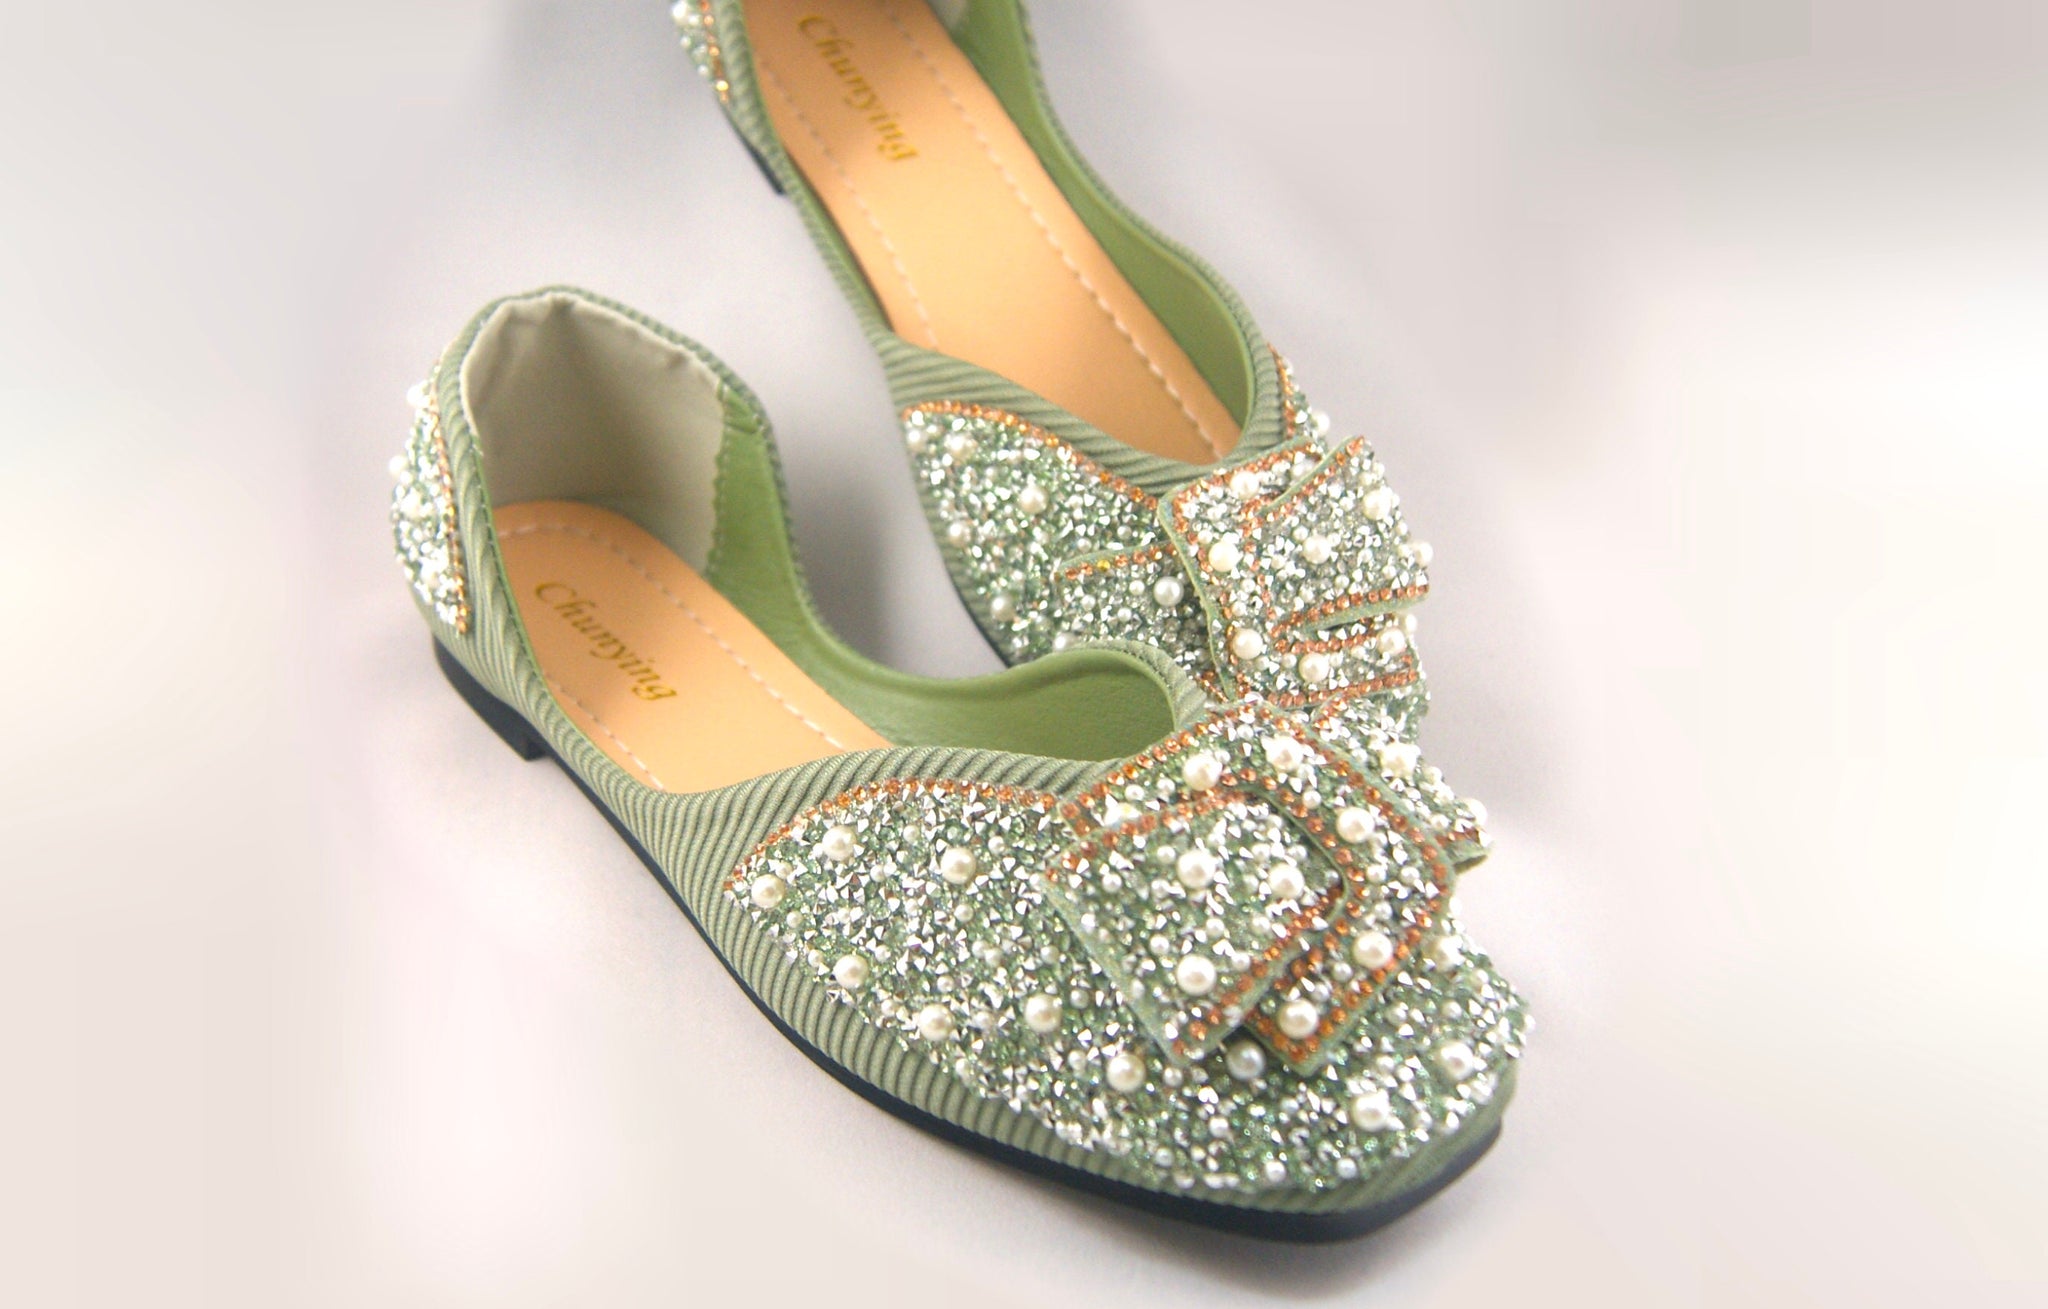 The Pearled and Bejeweled Ballet Flat | Blinged Out Yet Laid Back | Super Cute Slip On Shoe in Green with Buckle Detail | Goose Taffy